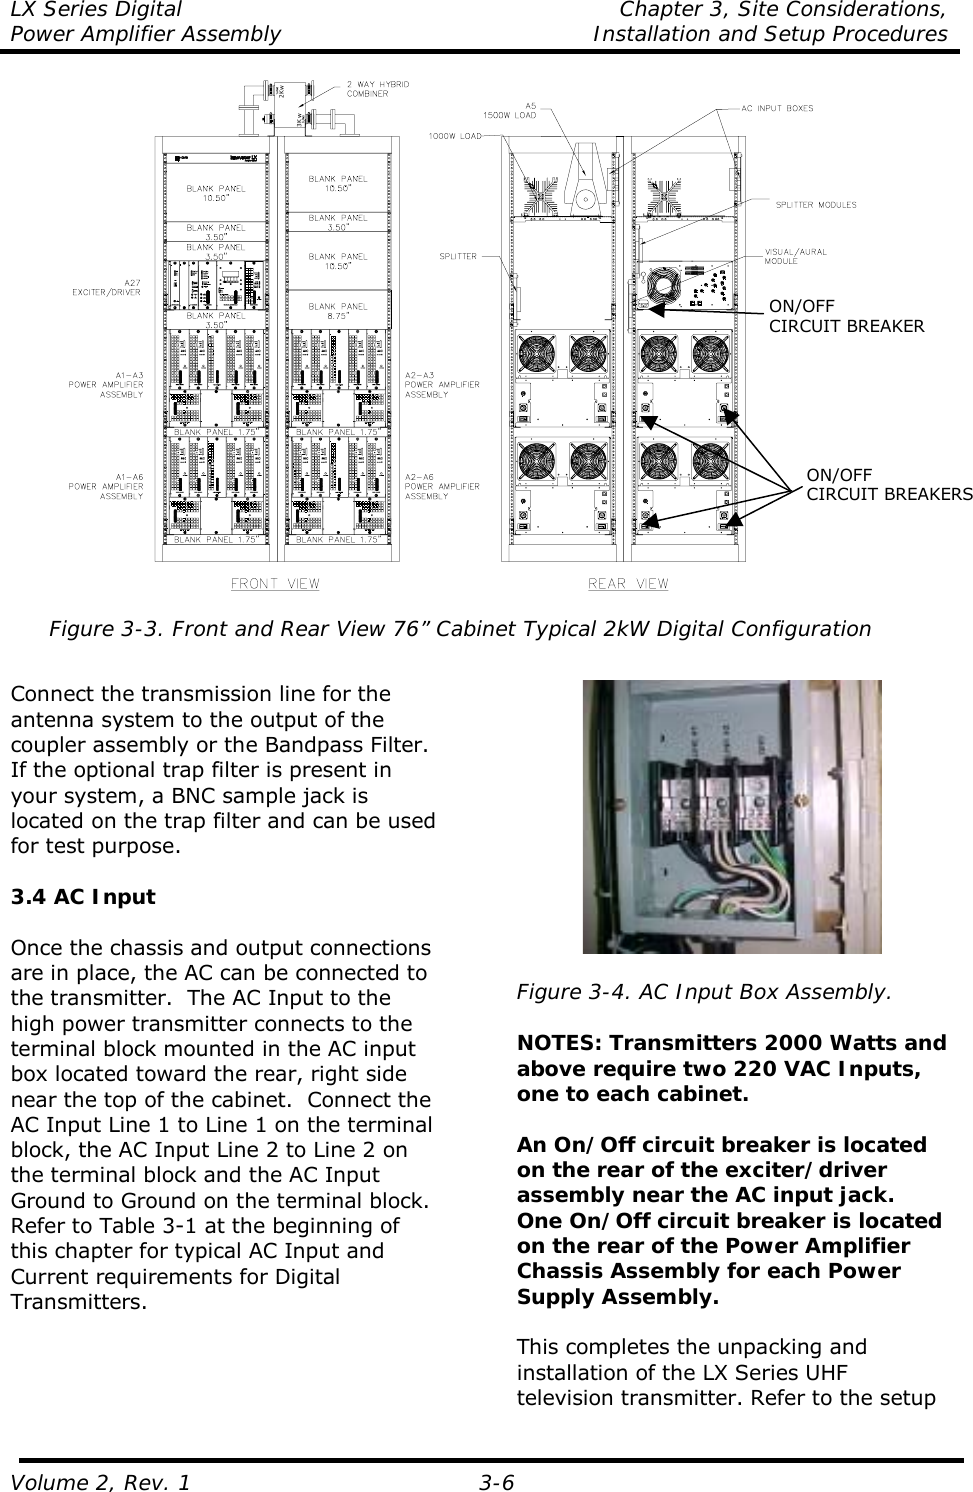 LX Series Digital  Chapter 3, Site Considerations,  Power Amplifier Assembly   Installation and Setup Procedures Volume 2, Rev. 1 3-6 3Kw2Kw Figure 3-3. Front and Rear View 76” Cabinet Typical 2kW Digital Configuration   Connect the transmission line for the antenna system to the output of the coupler assembly or the Bandpass Filter.  If the optional trap filter is present in your system, a BNC sample jack is located on the trap filter and can be used for test purpose.  3.4 AC Input  Once the chassis and output connections are in place, the AC can be connected to the transmitter.  The AC Input to the high power transmitter connects to the terminal block mounted in the AC input box located toward the rear, right side near the top of the cabinet.  Connect the AC Input Line 1 to Line 1 on the terminal block, the AC Input Line 2 to Line 2 on the terminal block and the AC Input Ground to Ground on the terminal block. Refer to Table 3-1 at the beginning of this chapter for typical AC Input and Current requirements for Digital Transmitters.    Figure 3-4. AC Input Box Assembly.  NOTES: Transmitters 2000 Watts and above require two 220 VAC Inputs, one to each cabinet.  An On/Off circuit breaker is located on the rear of the exciter/driver assembly near the AC input jack.  One On/Off circuit breaker is located on the rear of the Power Amplifier Chassis Assembly for each Power Supply Assembly.  This completes the unpacking and installation of the LX Series UHF television transmitter. Refer to the setup ON/OFF CIRCUIT BREAKERSON/OFF CIRCUIT BREAKER 